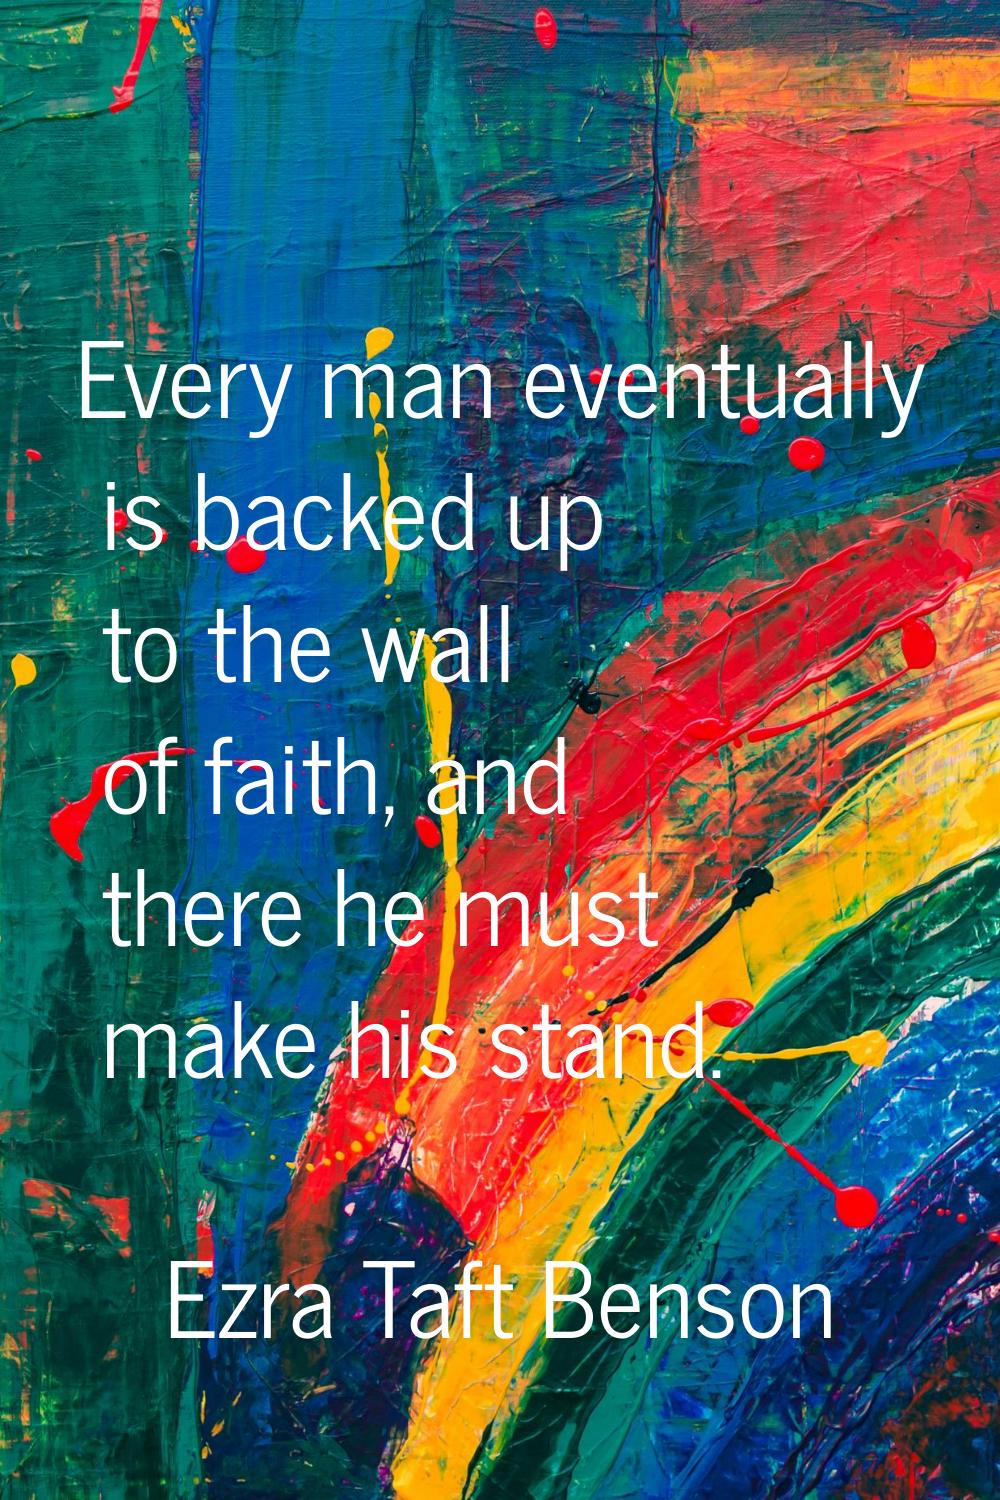 Every man eventually is backed up to the wall of faith, and there he must make his stand.